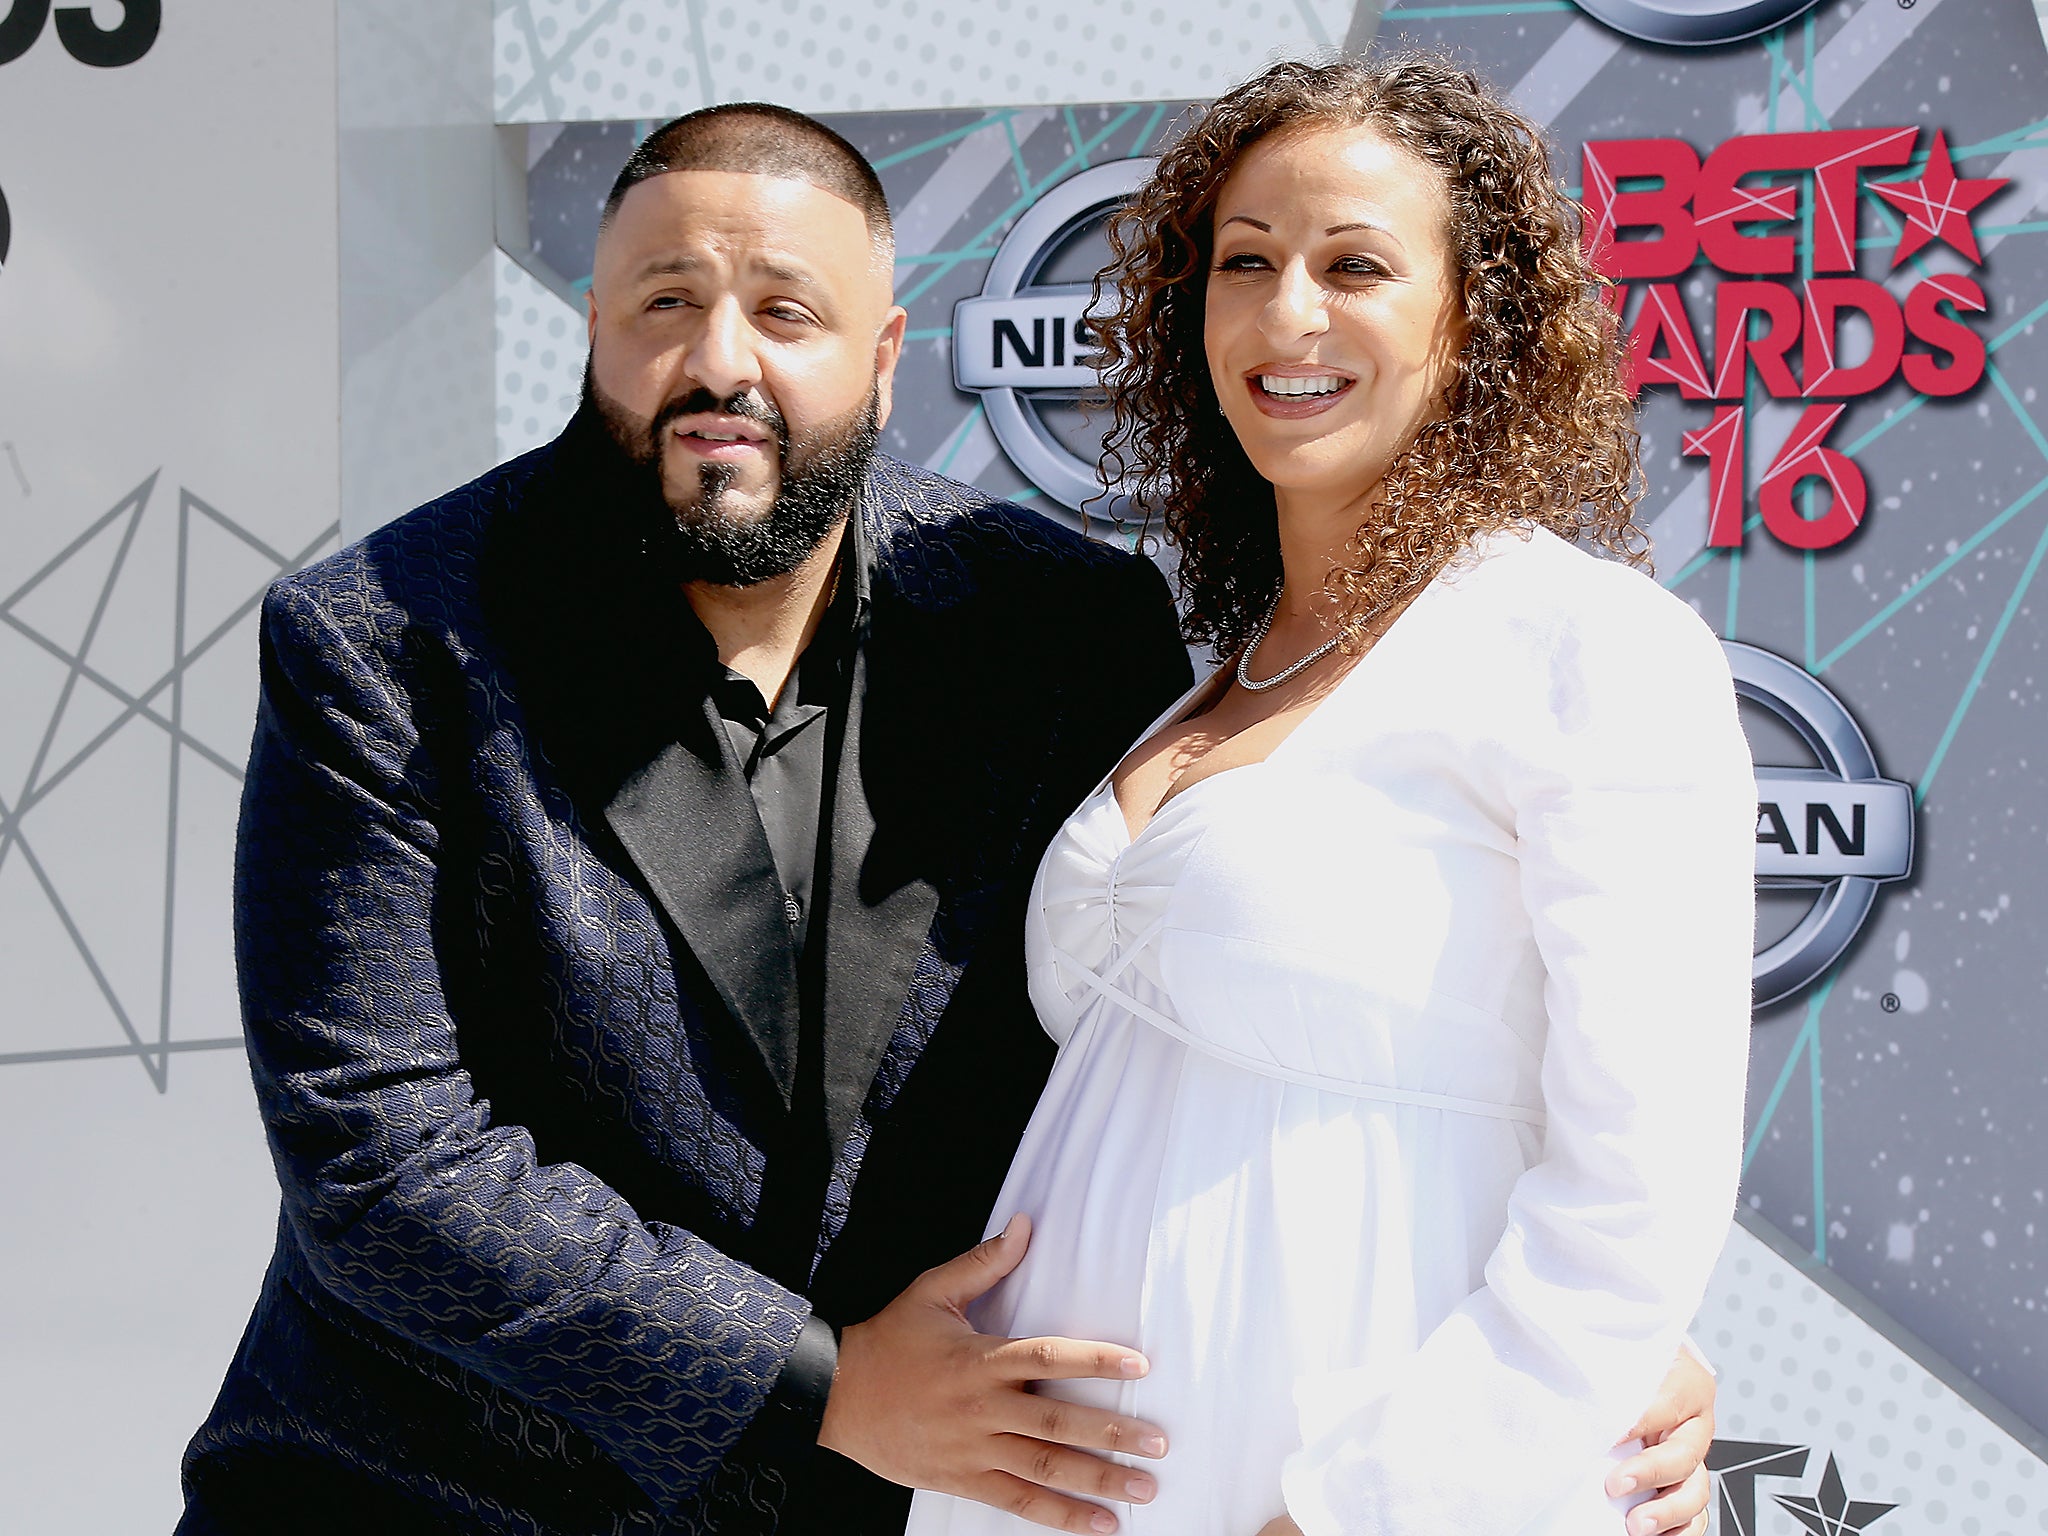 DJ Khaled and Nicole Tuck attend the 2016 BET Awards at the Microsoft Theater in Los Angeles, California